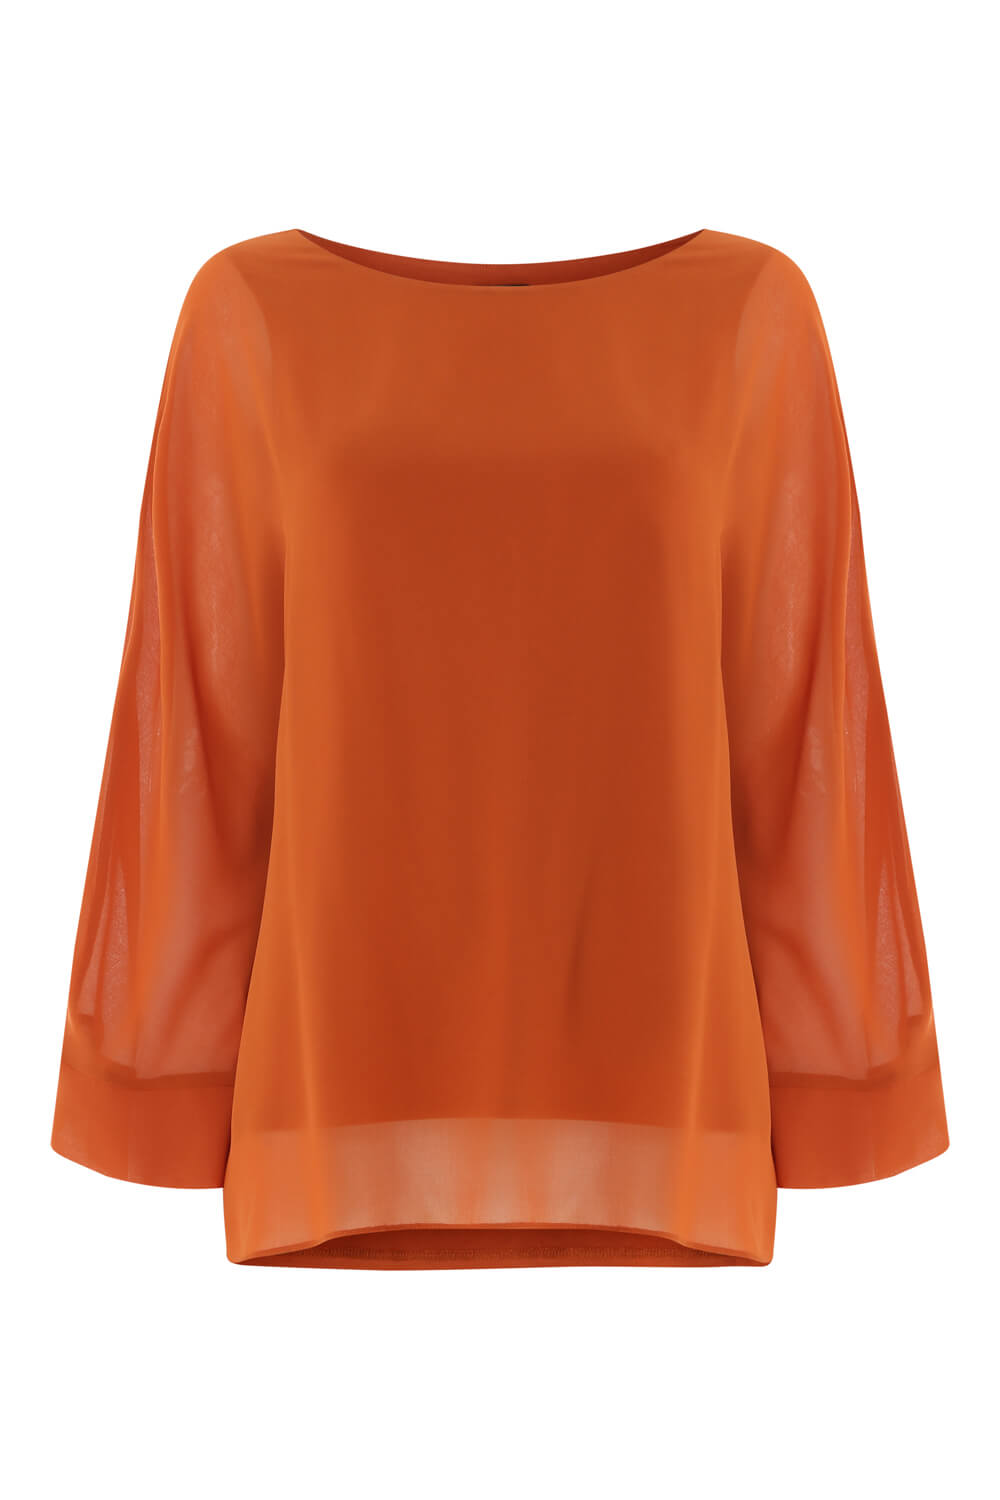 Copper Long Sleeve Overlay Chiffon Top, Image 4 of 4